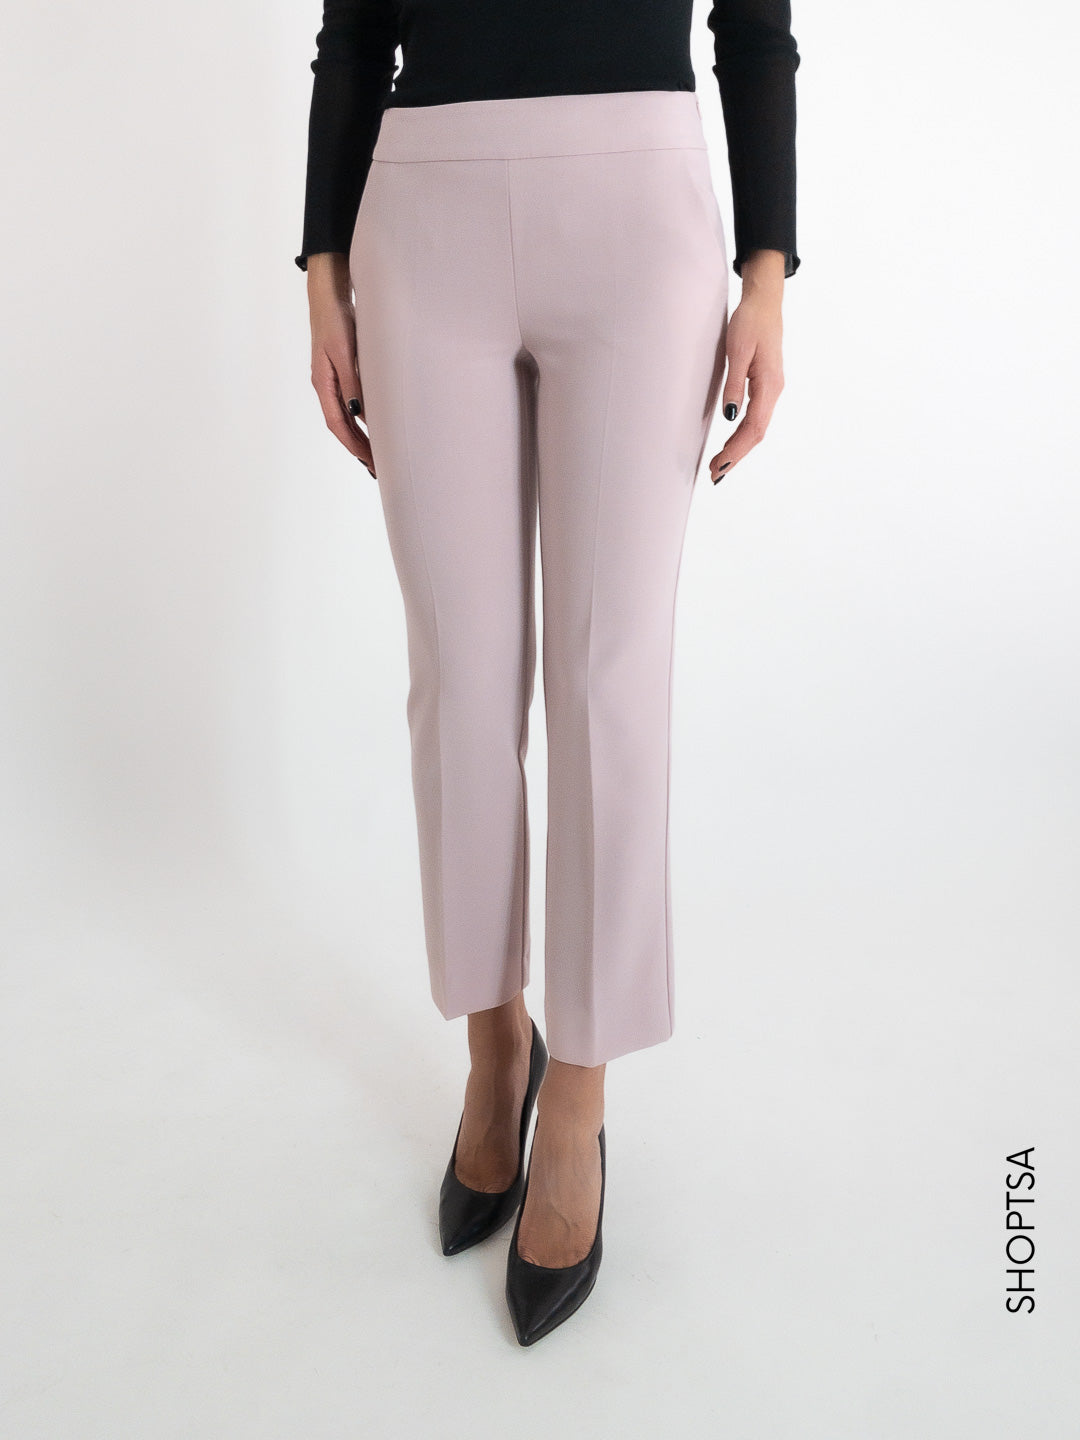 MARRA - EMME Marella straight stretch trousers